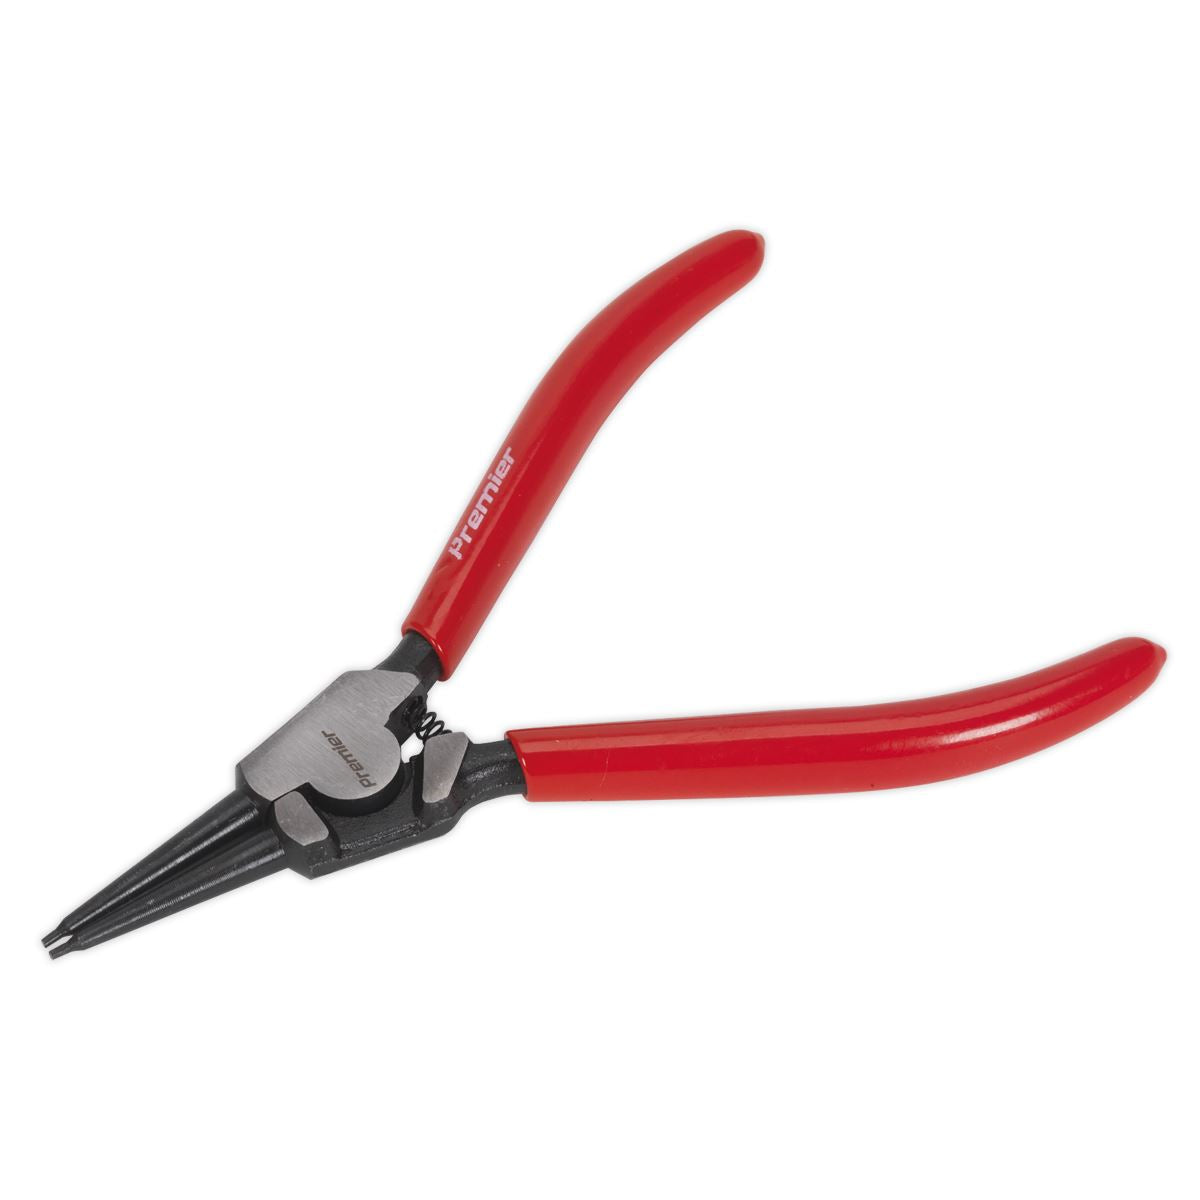 Sealey Premier Circlip Pliers External Straight Nose 180mm